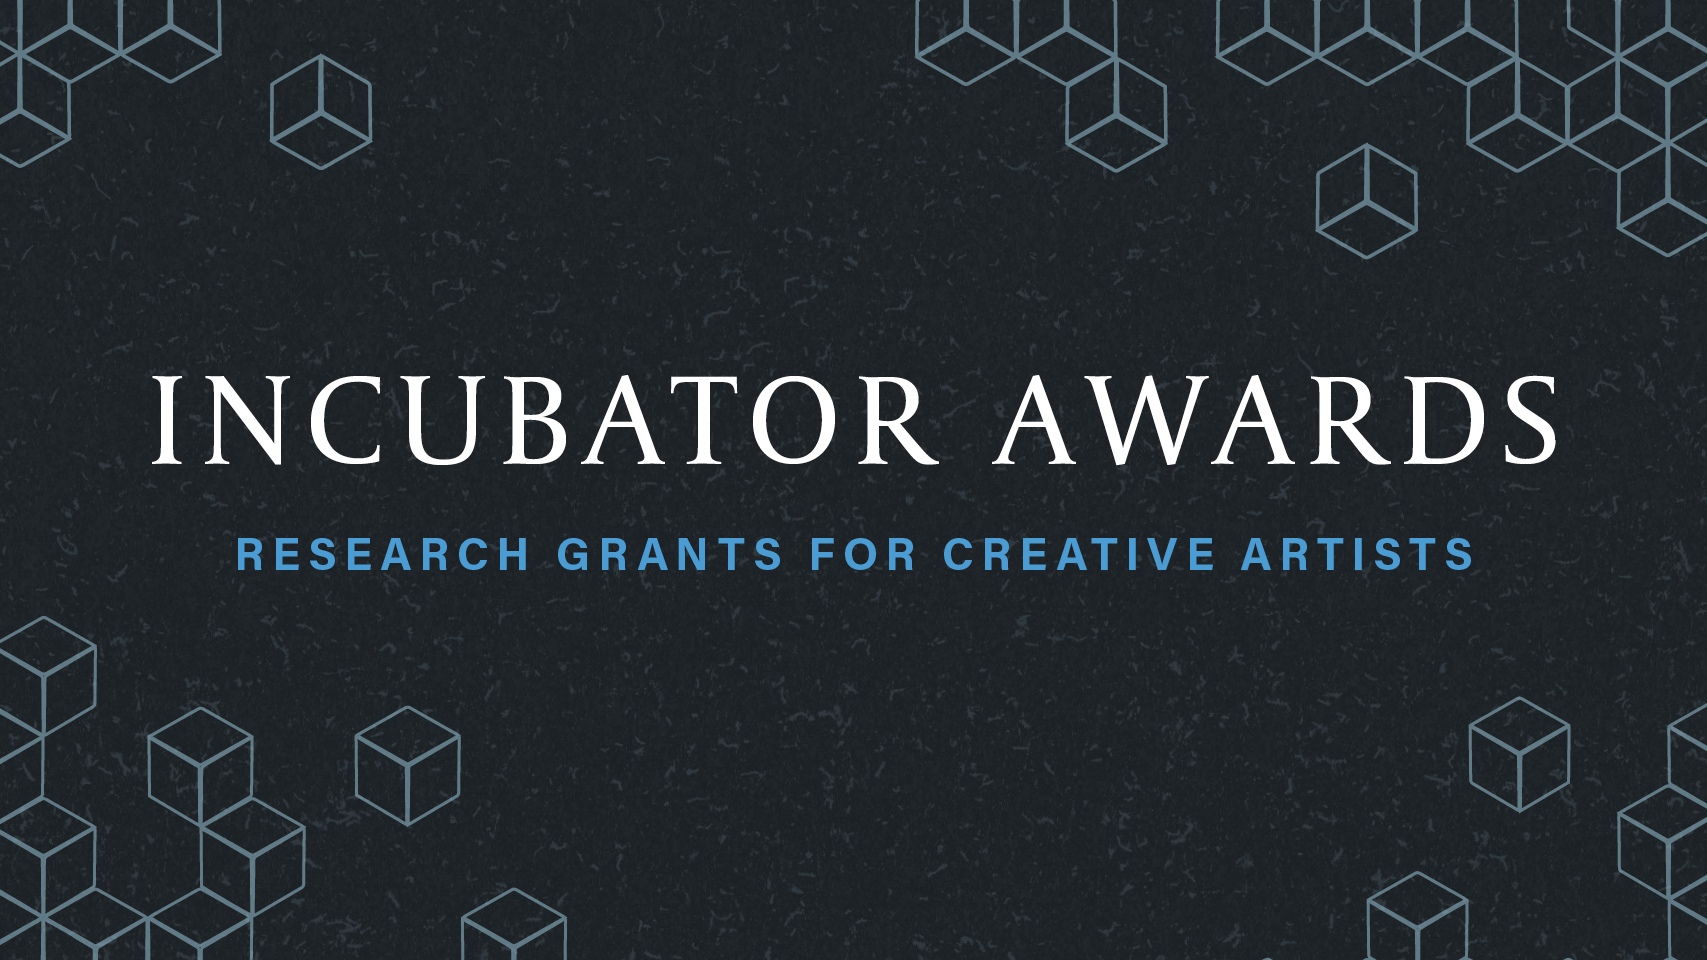 Apply for the Incubator Awards: Research Grants for Creative Artists